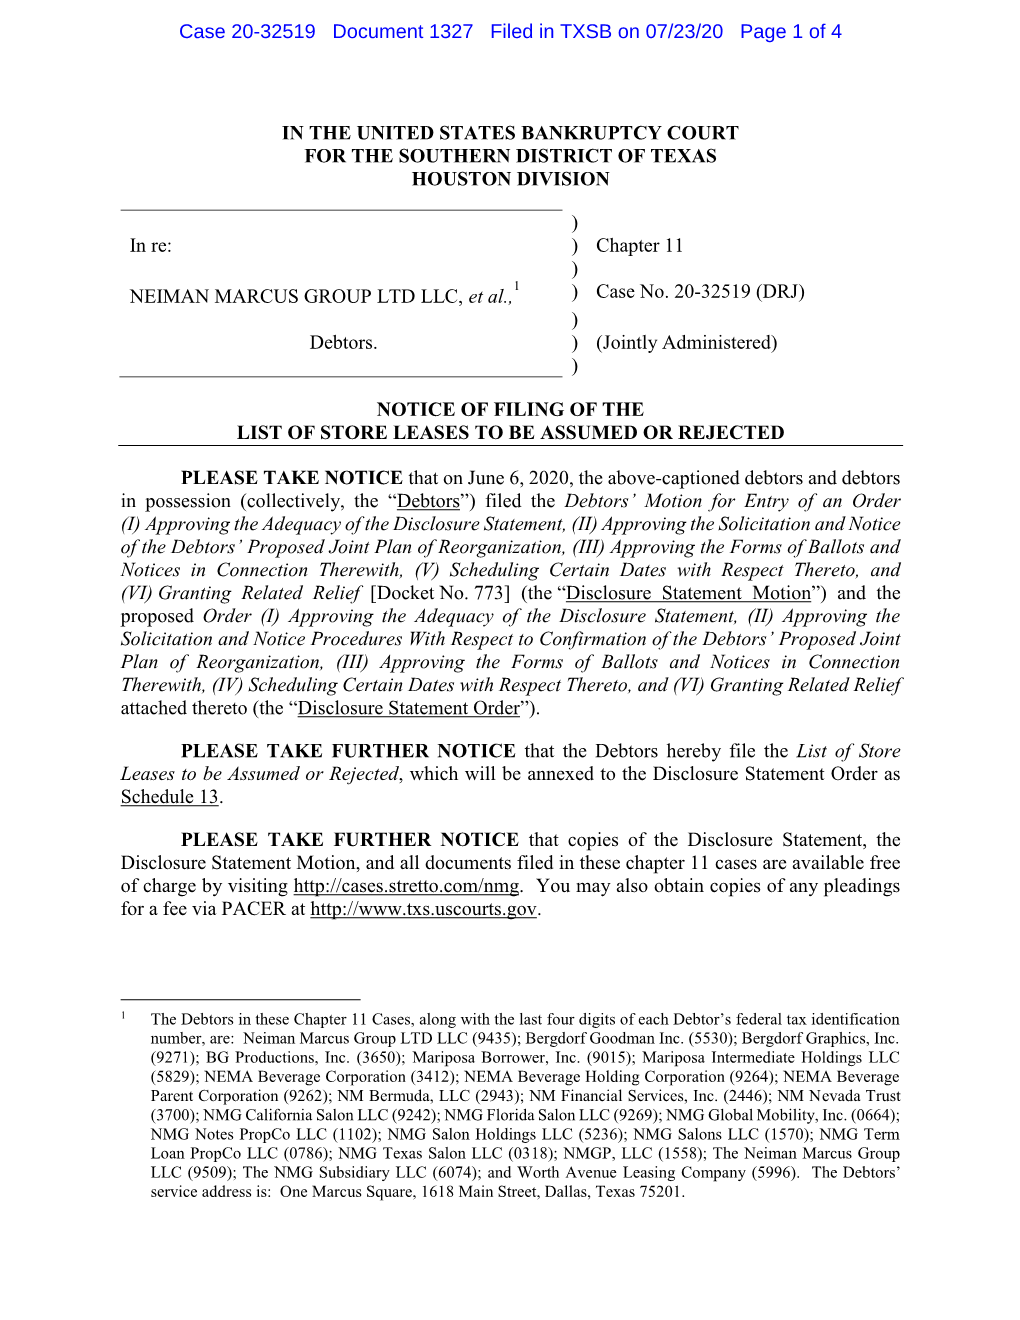 Case 20-32519 Document 1327 Filed in TXSB on 07/23/20 Page 1 of 4